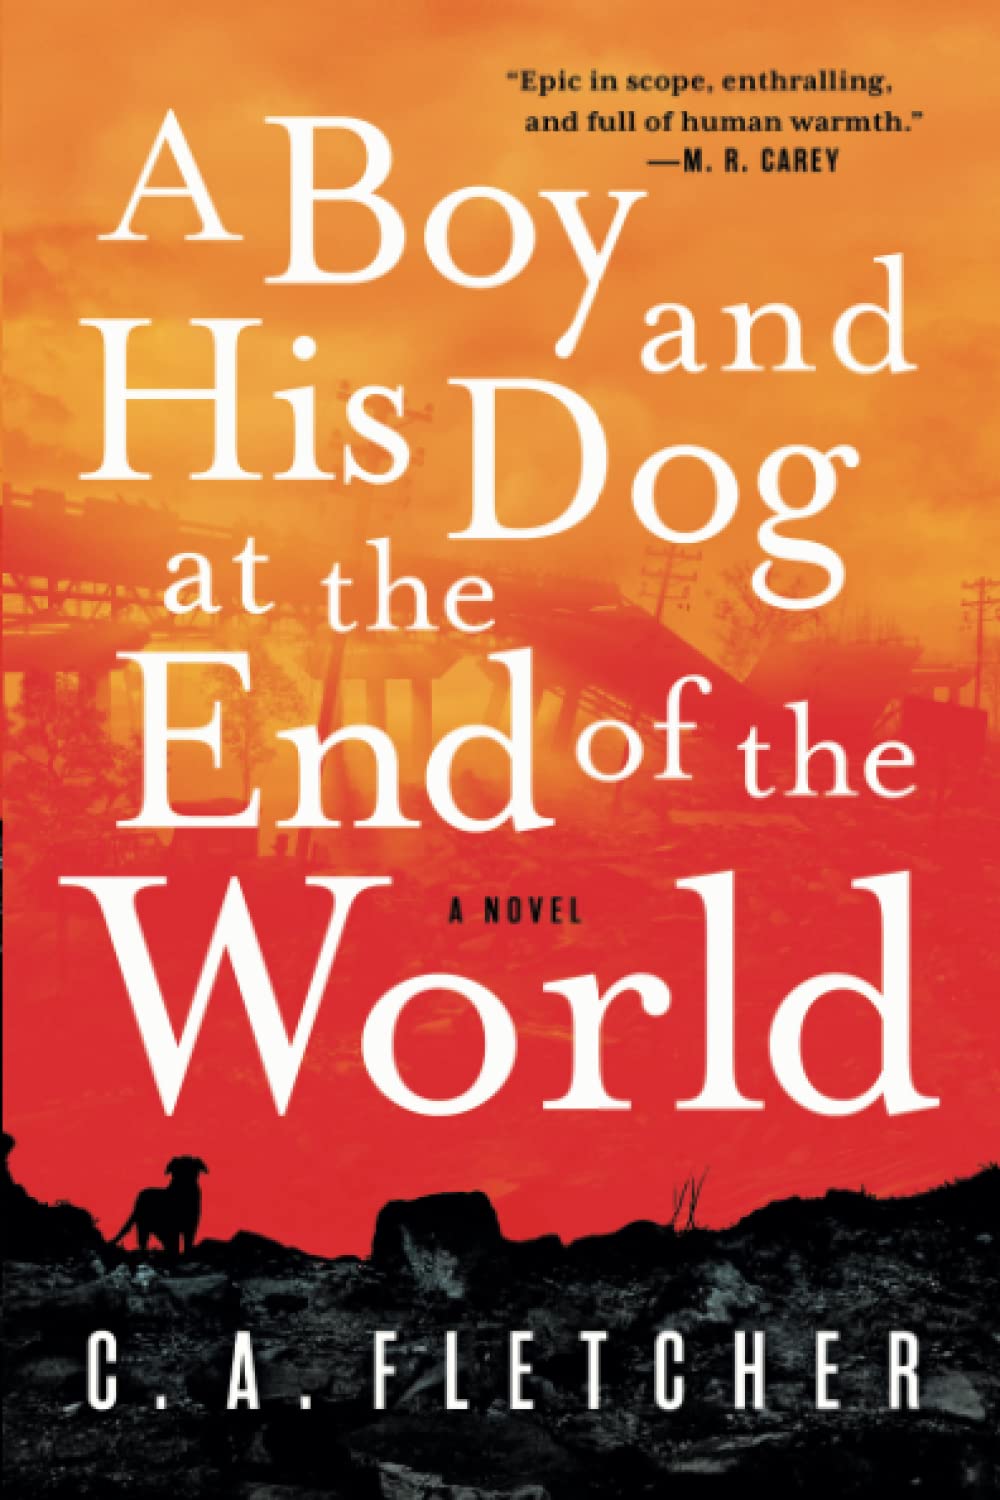 A Boy and His Dog at The End of the World